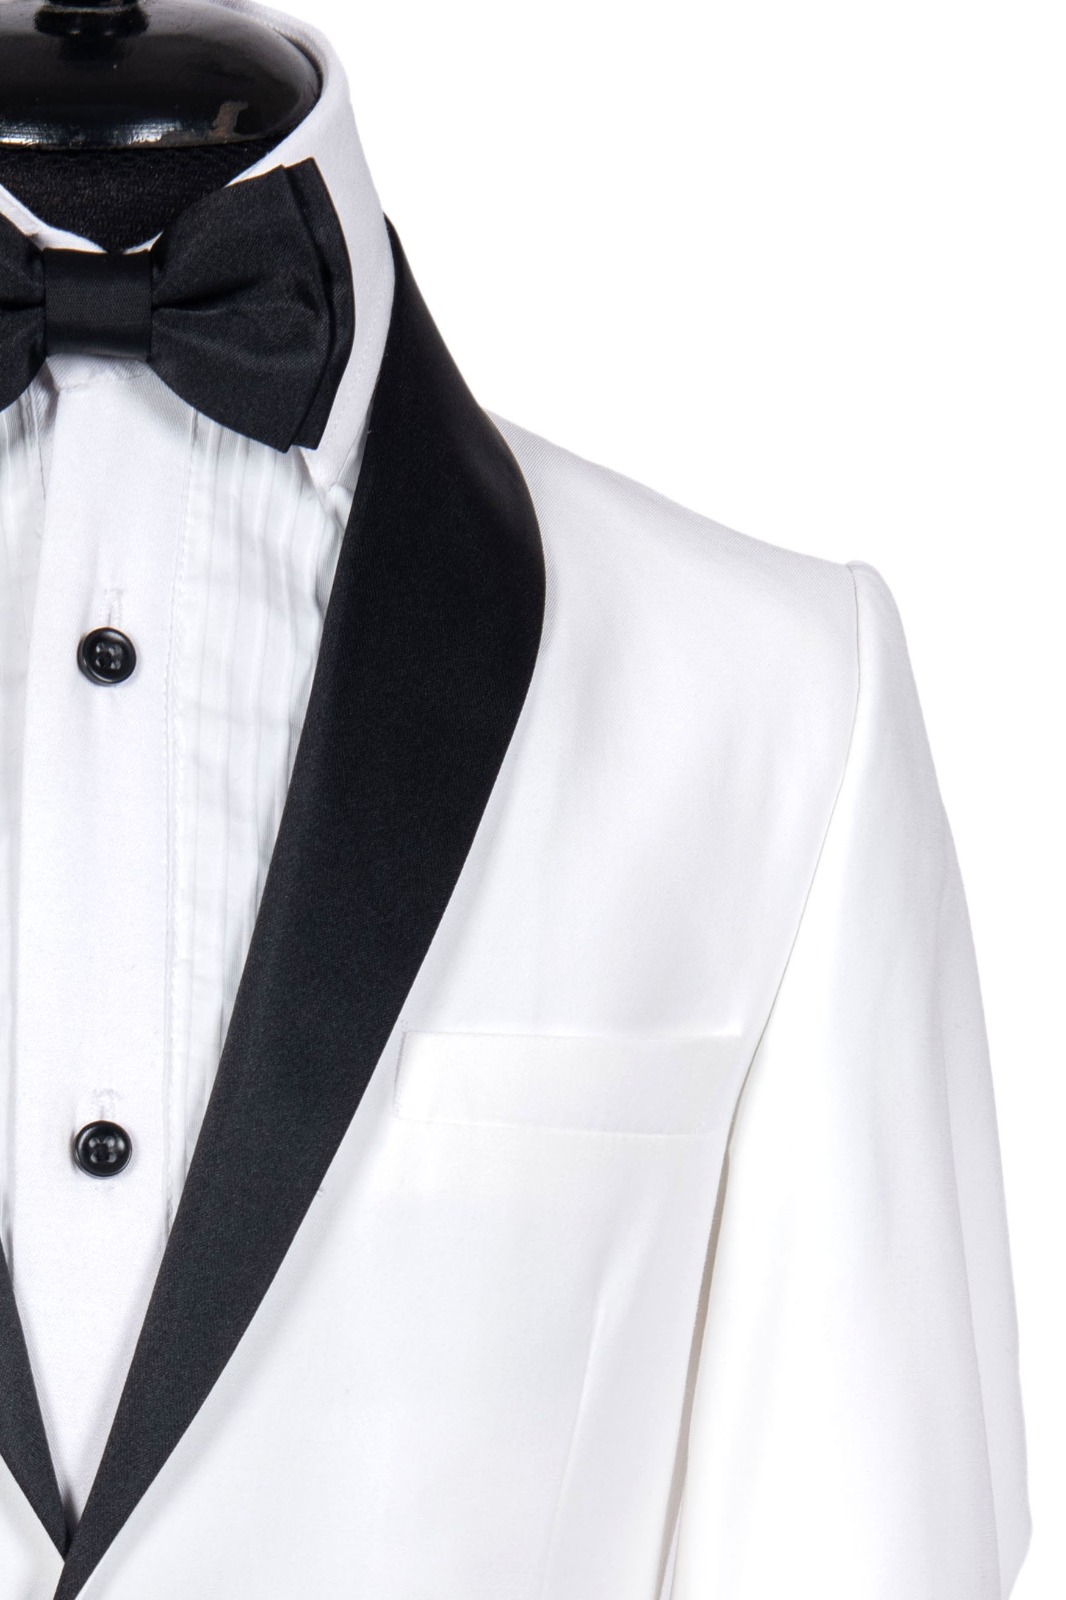 SINGLE BREASTED WHITE TUXEDO WITH BLACK LAPEL KID SUIT - Stanlion